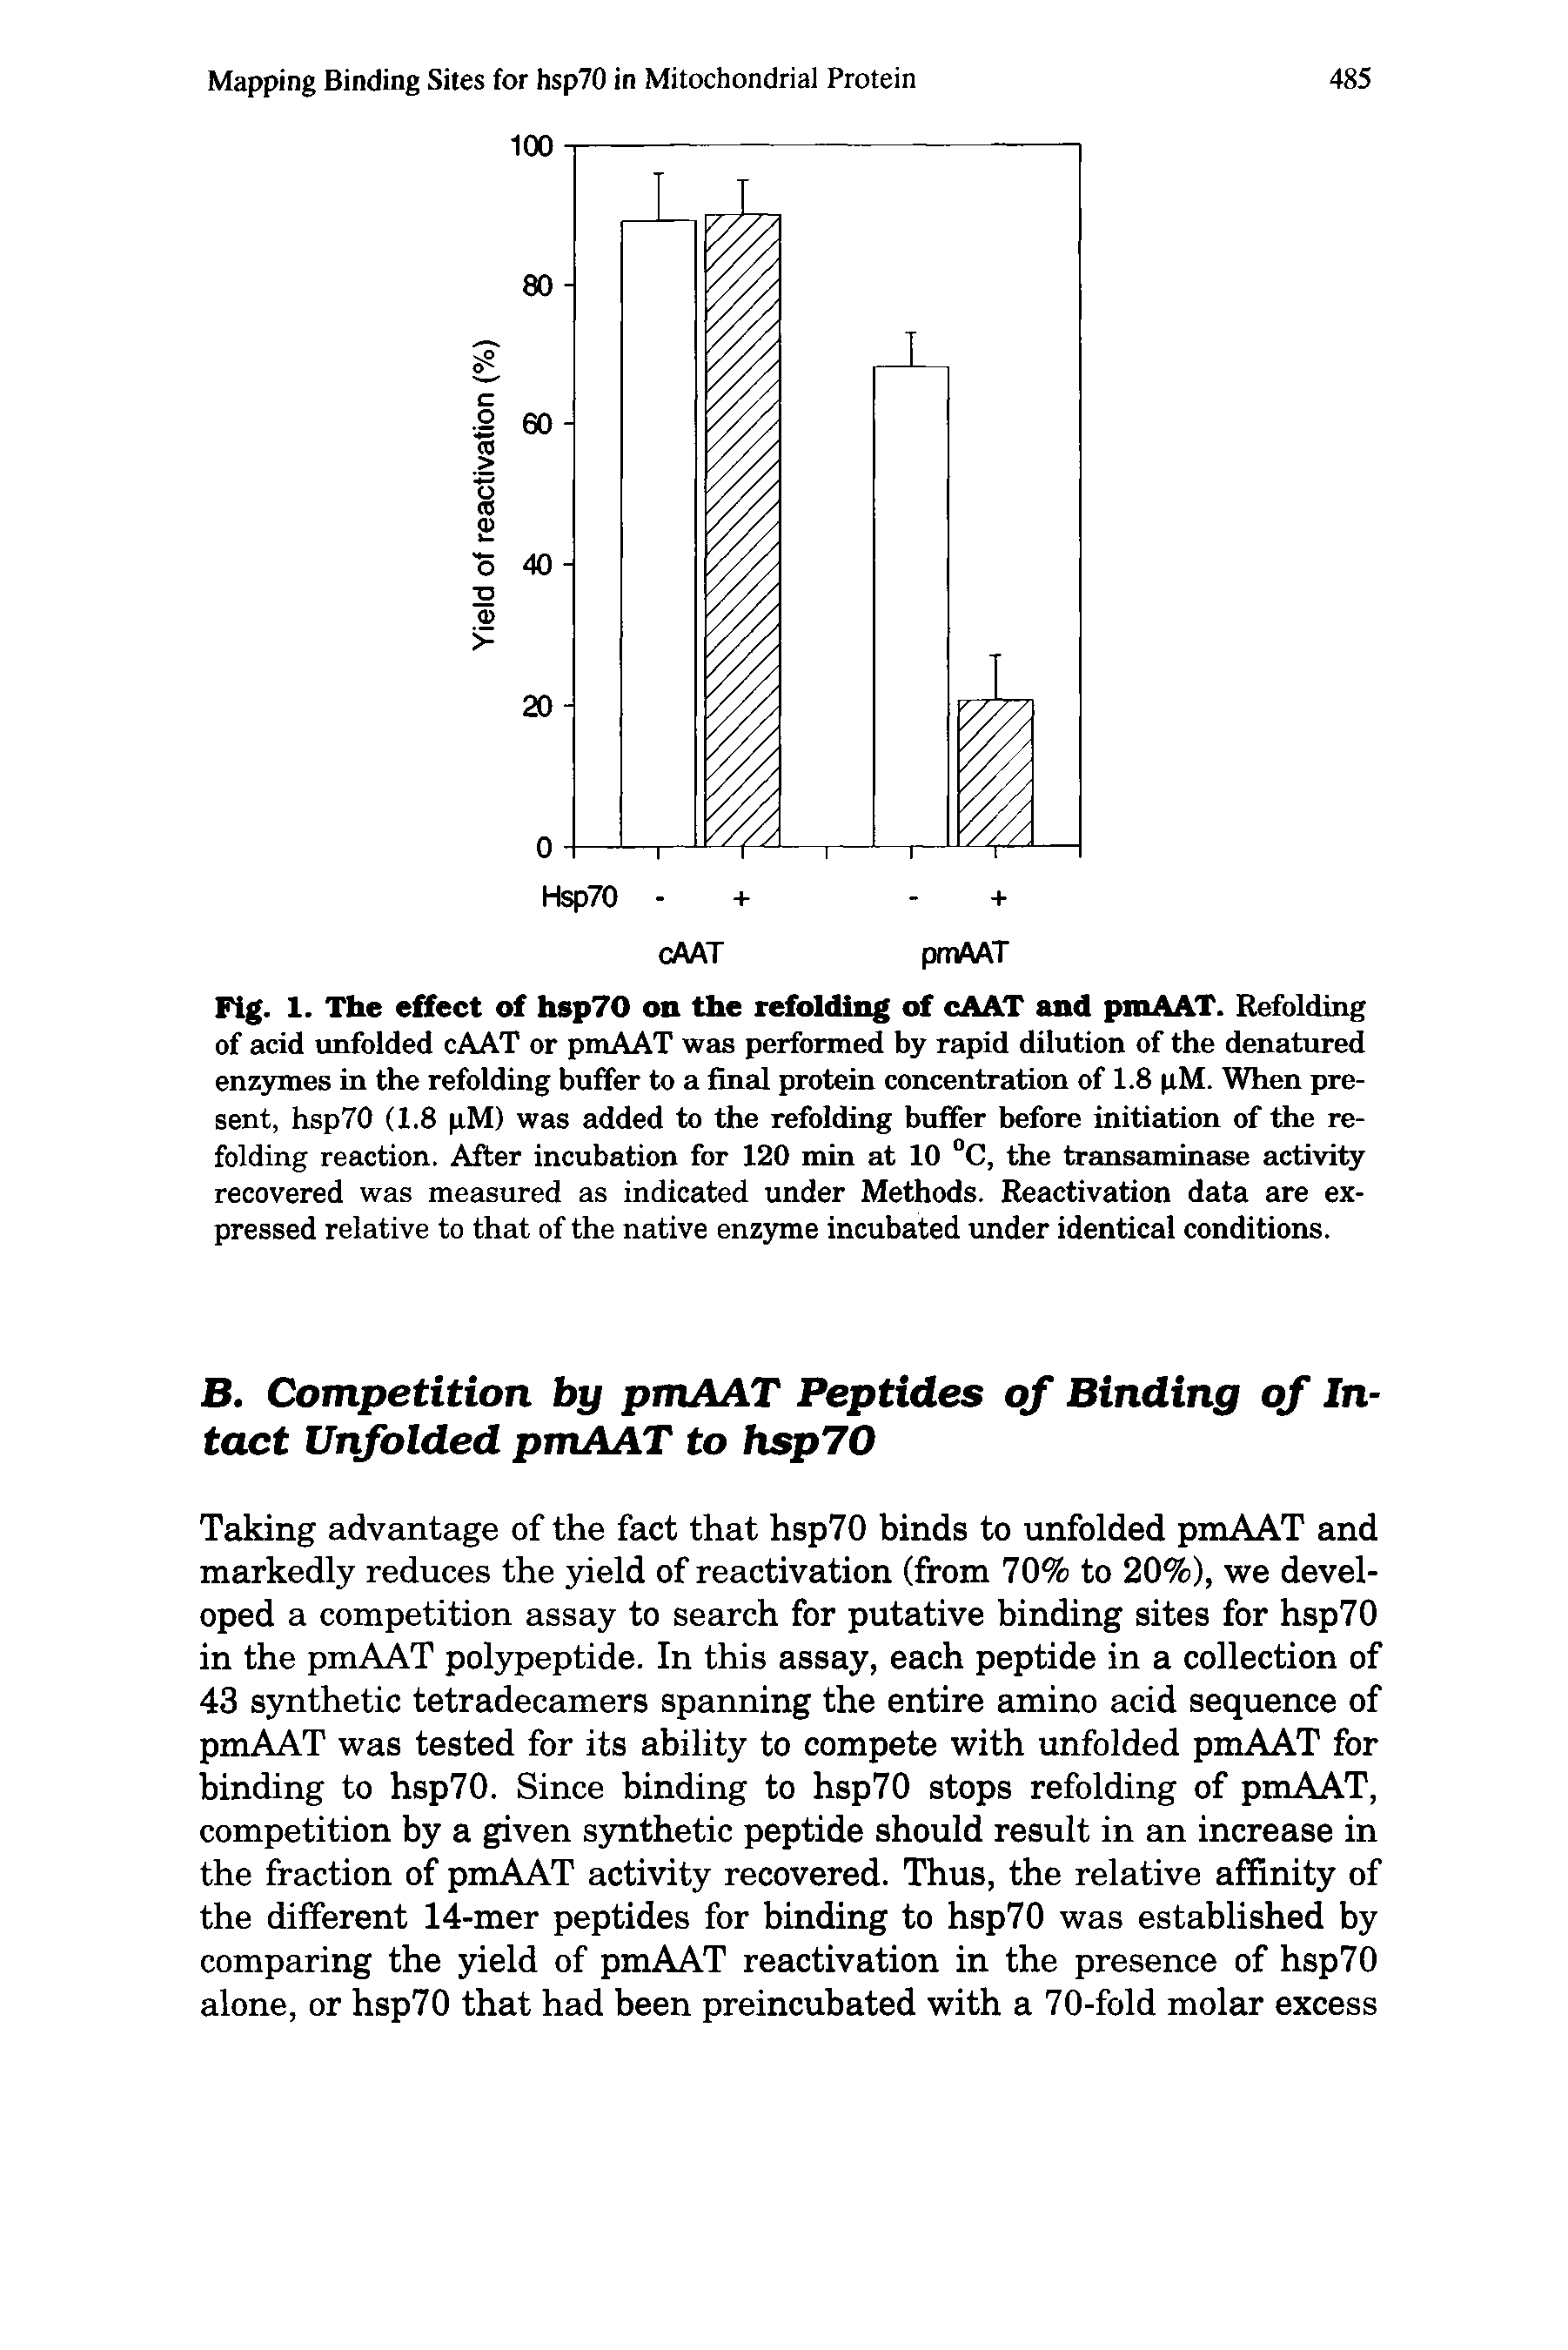 Fig. 1. The effect of hsp70 on the refolding of cAAT and pmAAT. Refolding of acid unfolded cAAT or pmAAT was performed by rapid dilution of the denatured enz3rmes in the refolding buffer to a final protein concentration of 1.8 pM. When present, hsp70 (1.8 pM) was added to the refolding buffer before initiation of the refolding reaction. After incubation for 120 min at 10 C, the transaminase activity recovered was measured as indicated under Methods. Reactivation data are expressed relative to that of the native enzyme incubated under identical conditions.